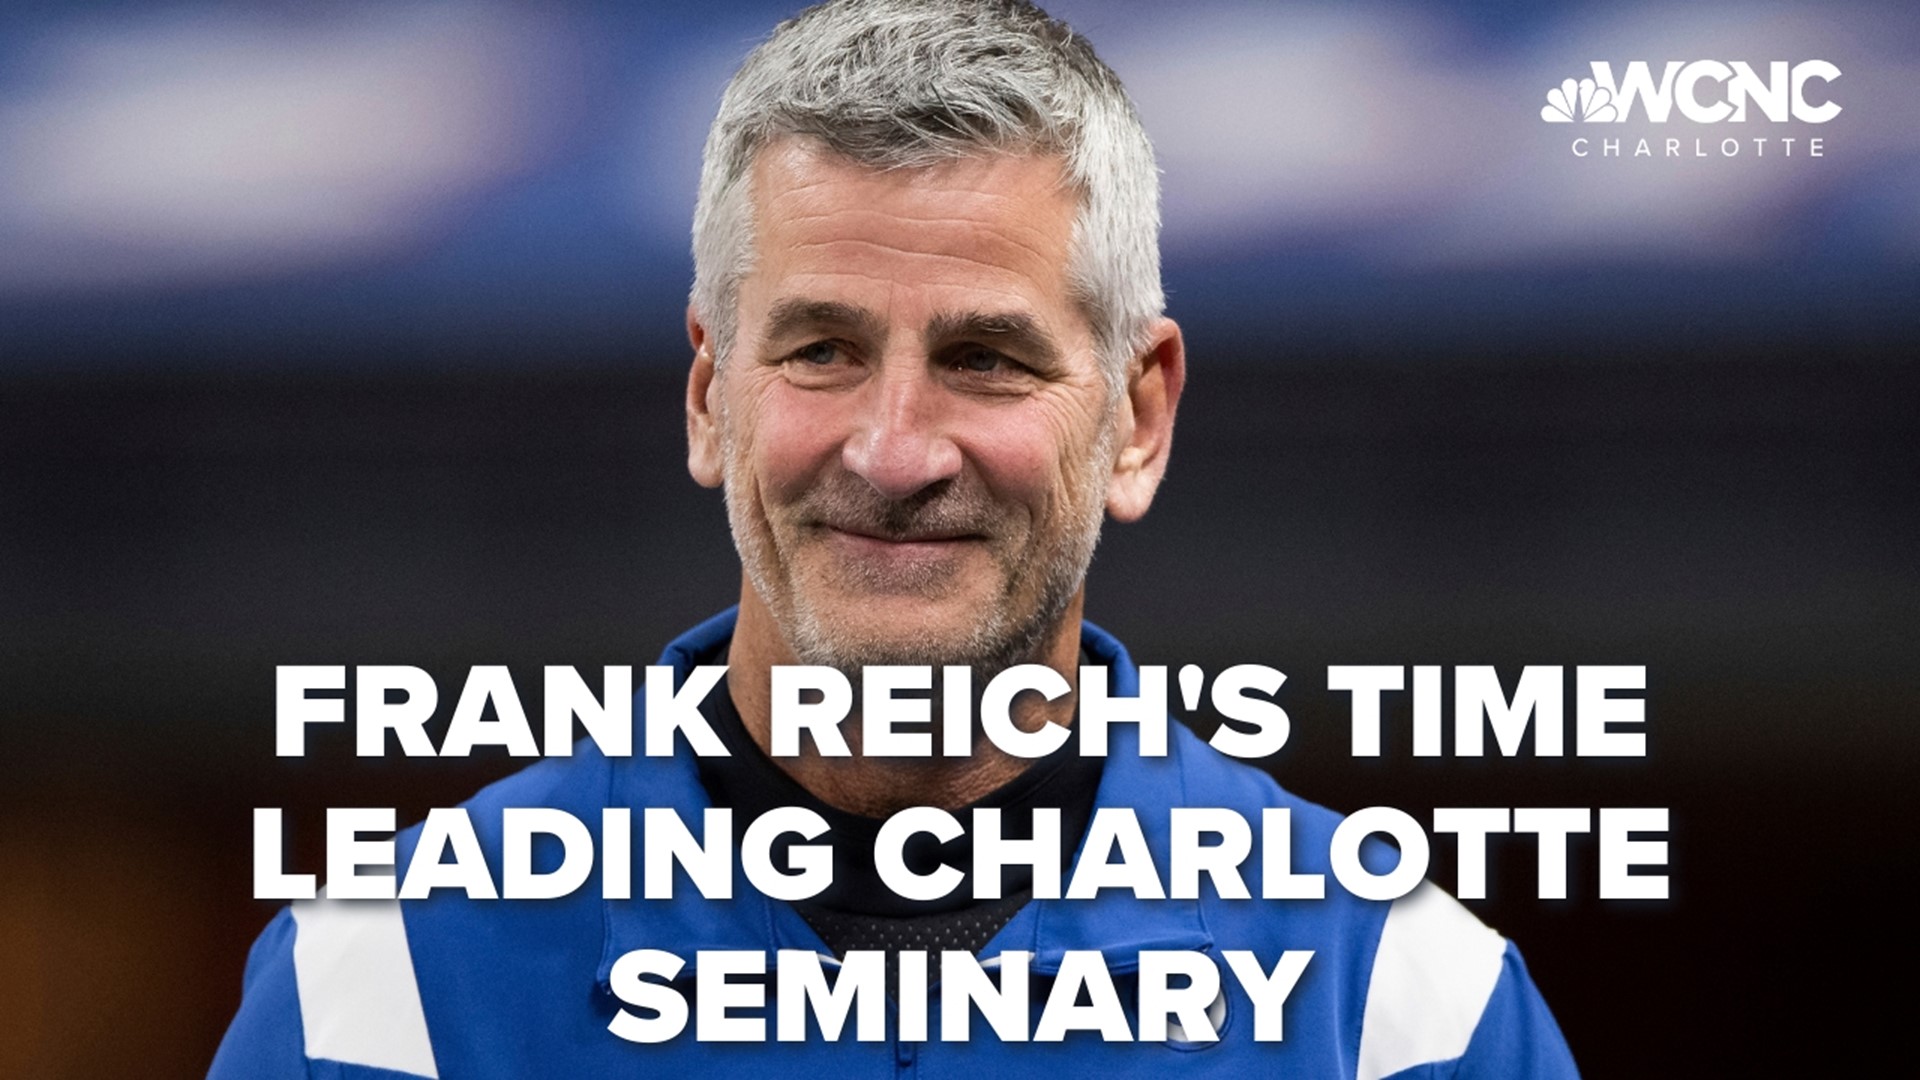 By the time Frank Reich arrived at Charlotte's Reformed Theological Seminary campus, he had played 13 seasons in the NFL, and was a known name among football fans.